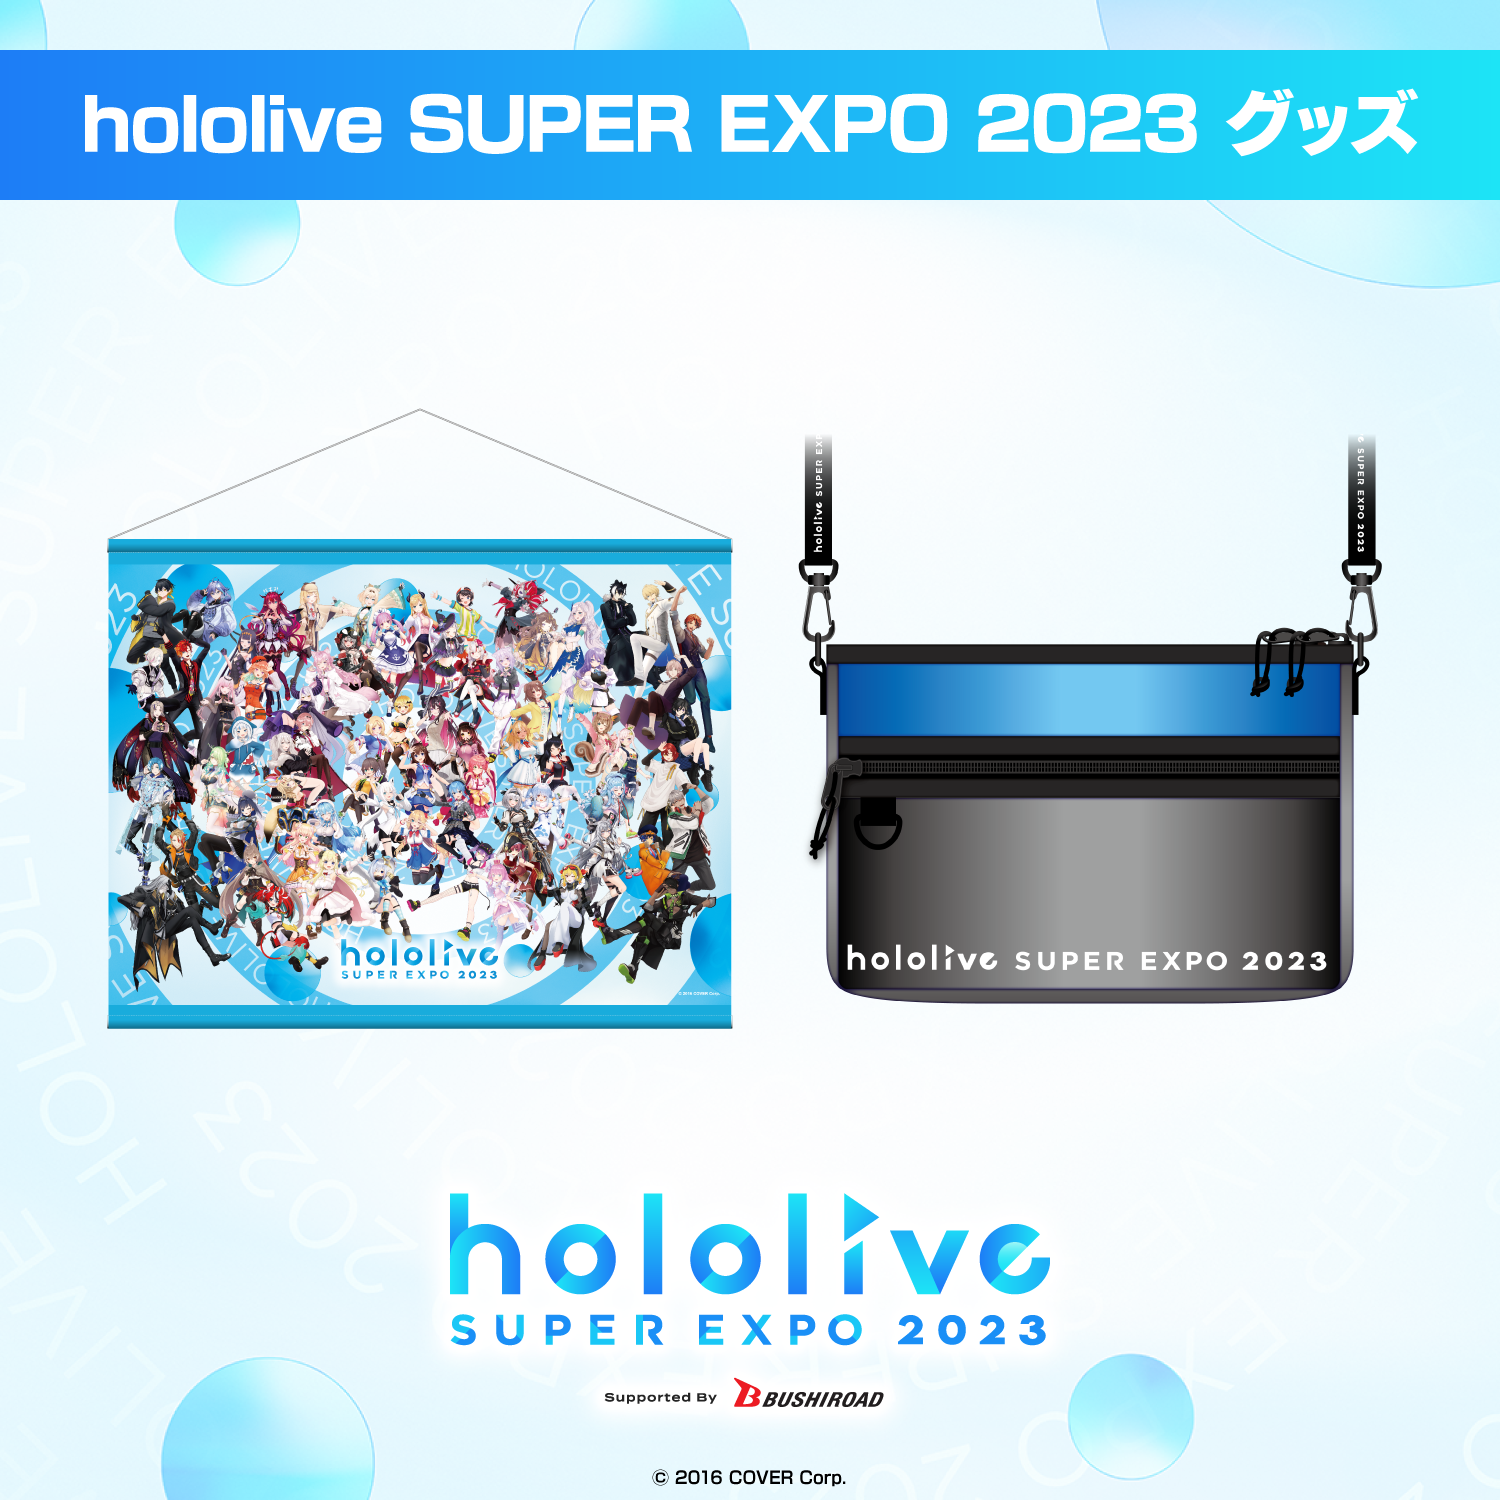 hololive SUPER EXPO 2023』グッズ – hololive production official shop